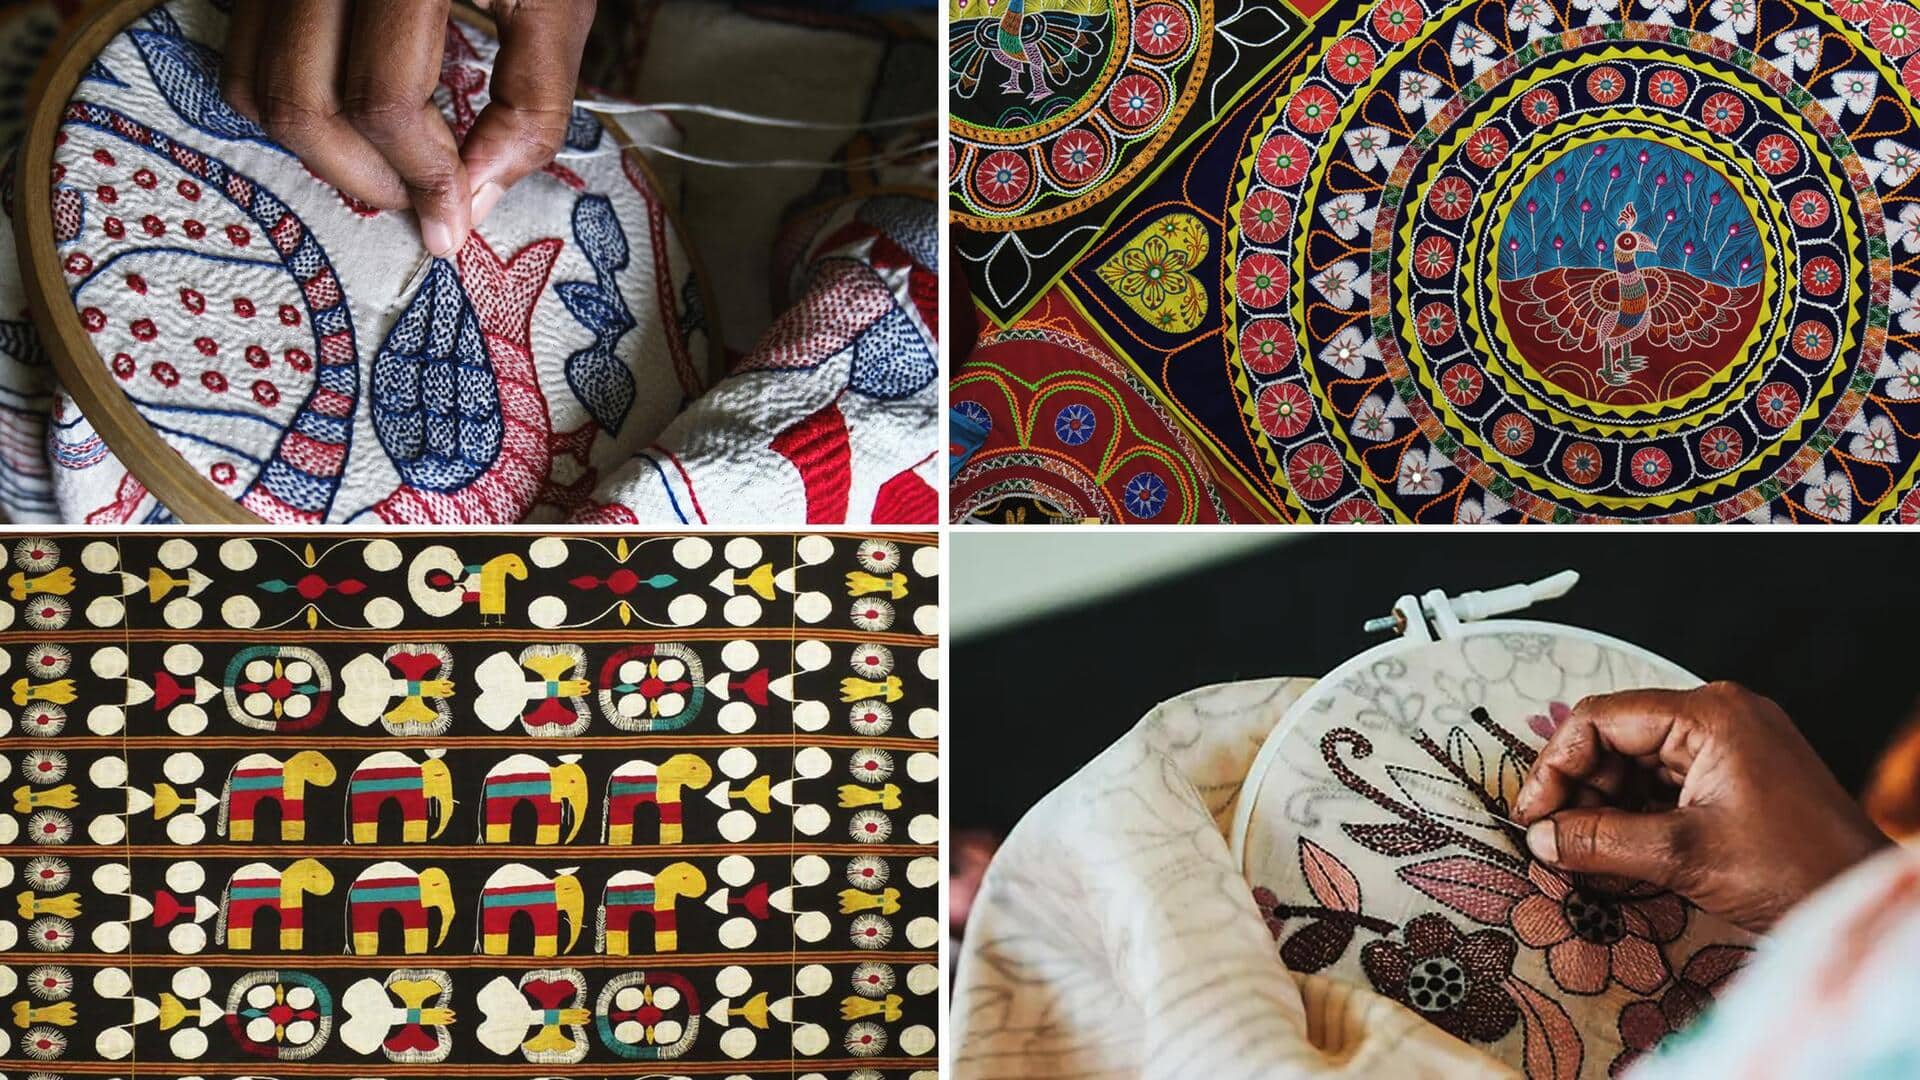 Exploring Eastern Indian embroidery: From 'kantha' to 'pipli applique' 